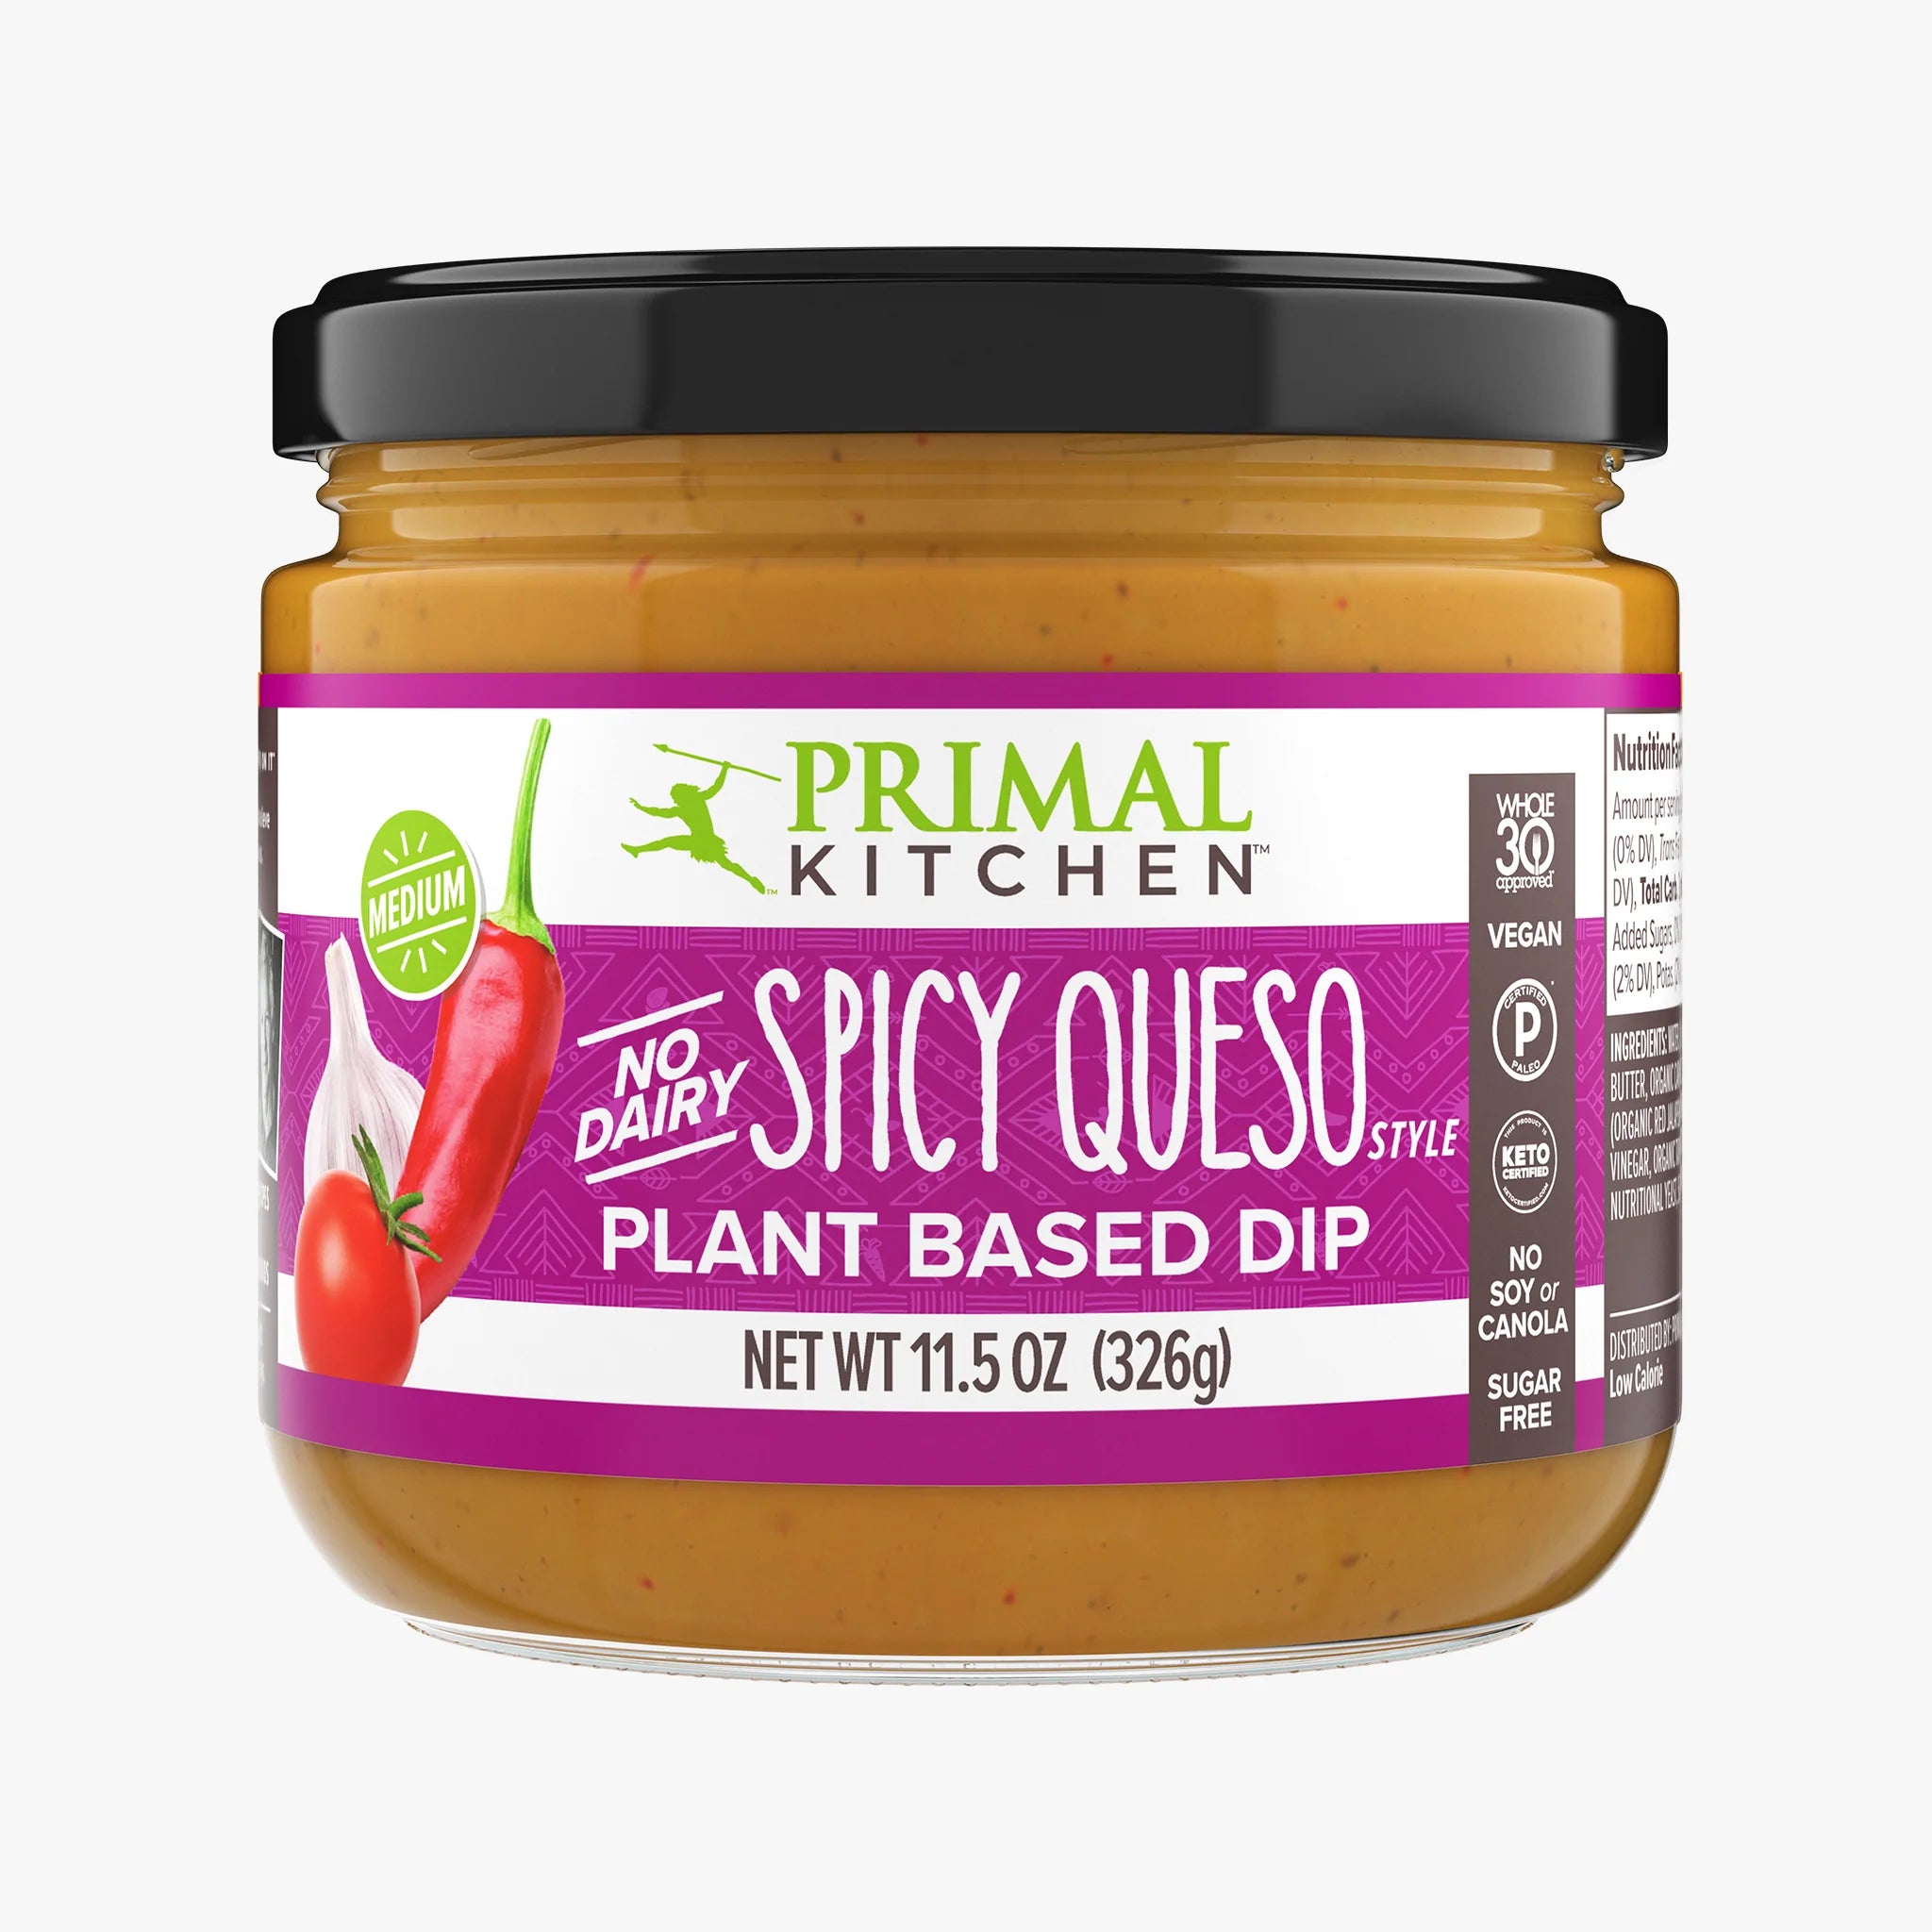 Primal Kitchen Plant Based Dip, No Dairy, Queso Style, Mild - 11.5 oz